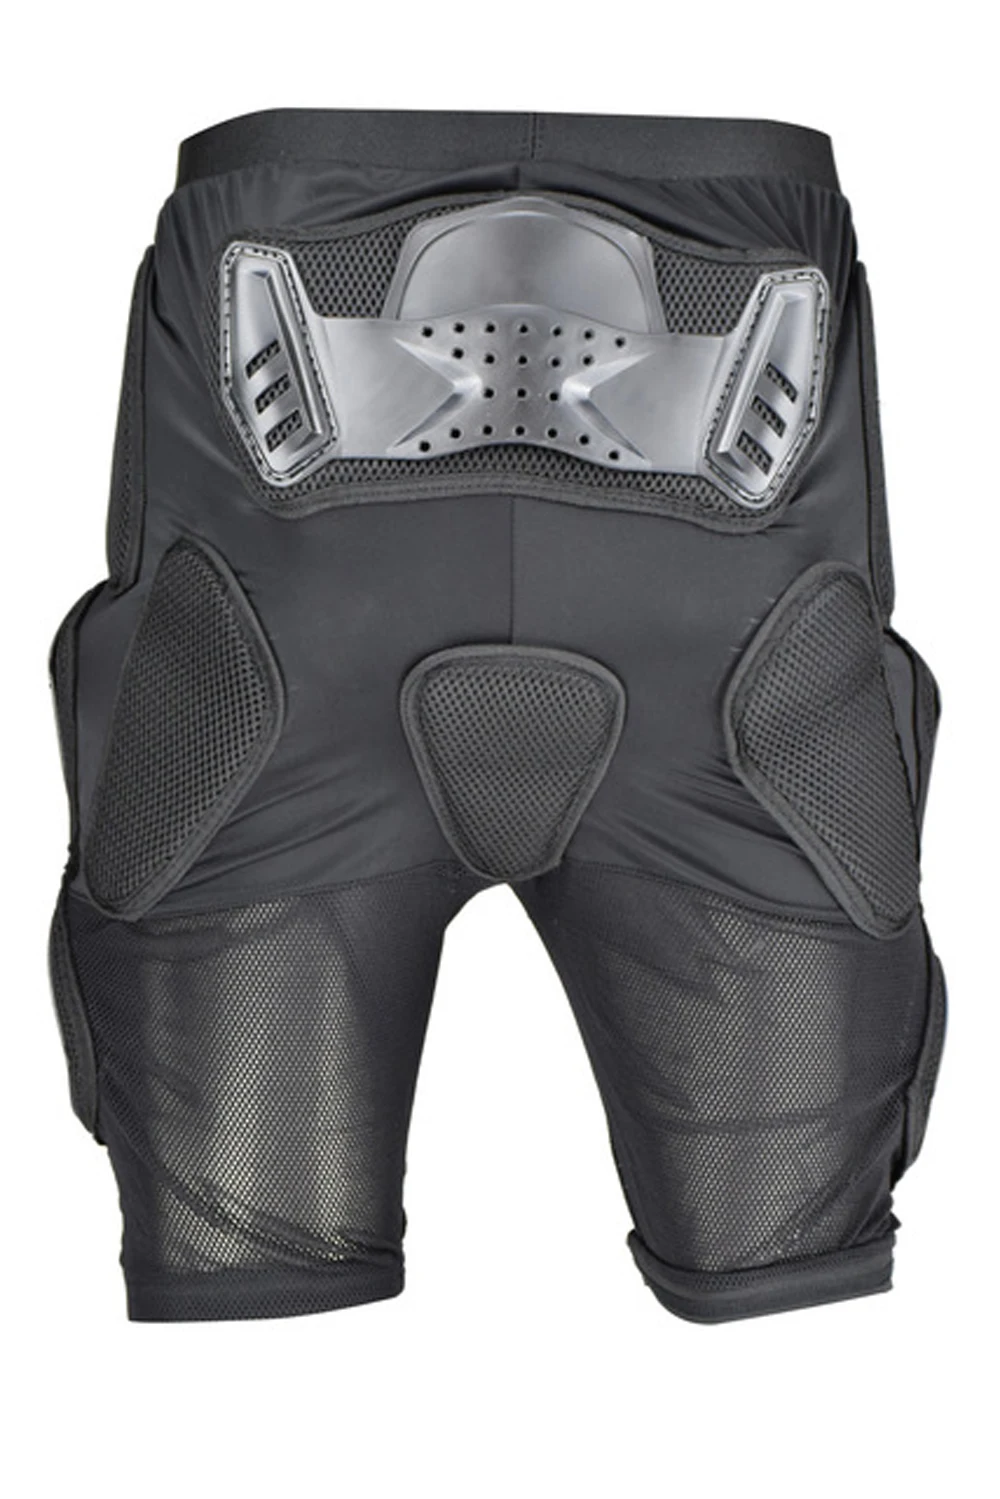 GHOST RACING Motocross Short Protector Motorcycle Shorts Moto Protective Gear Ar - £339.74 GBP